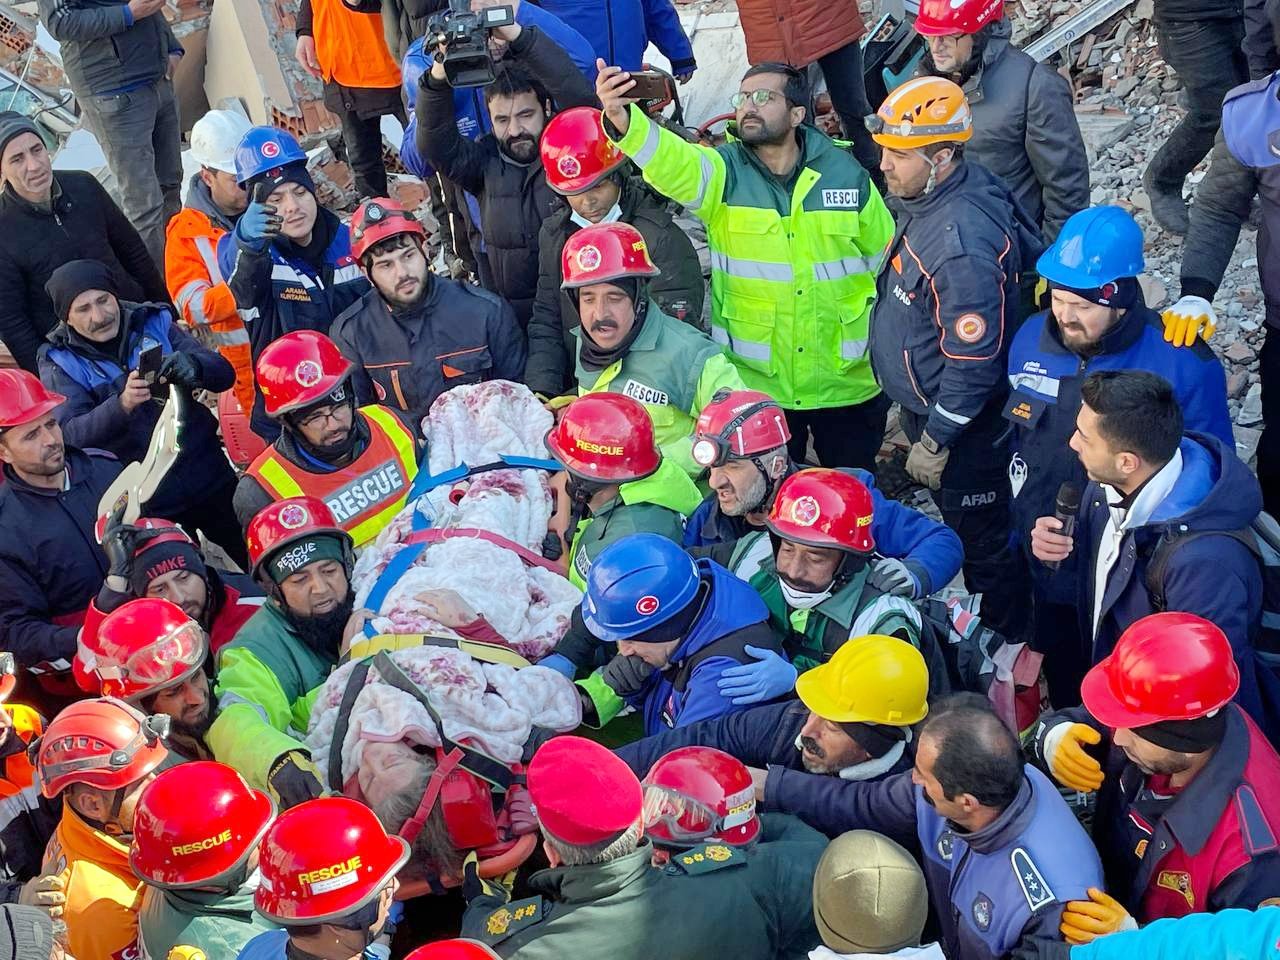 Pakistani search and rescue teams working in Adıyaman rescue a 50-year-old woman 57 hours after the quake struck, Türkiye, Feb. 8, 2023. (AA Photo)